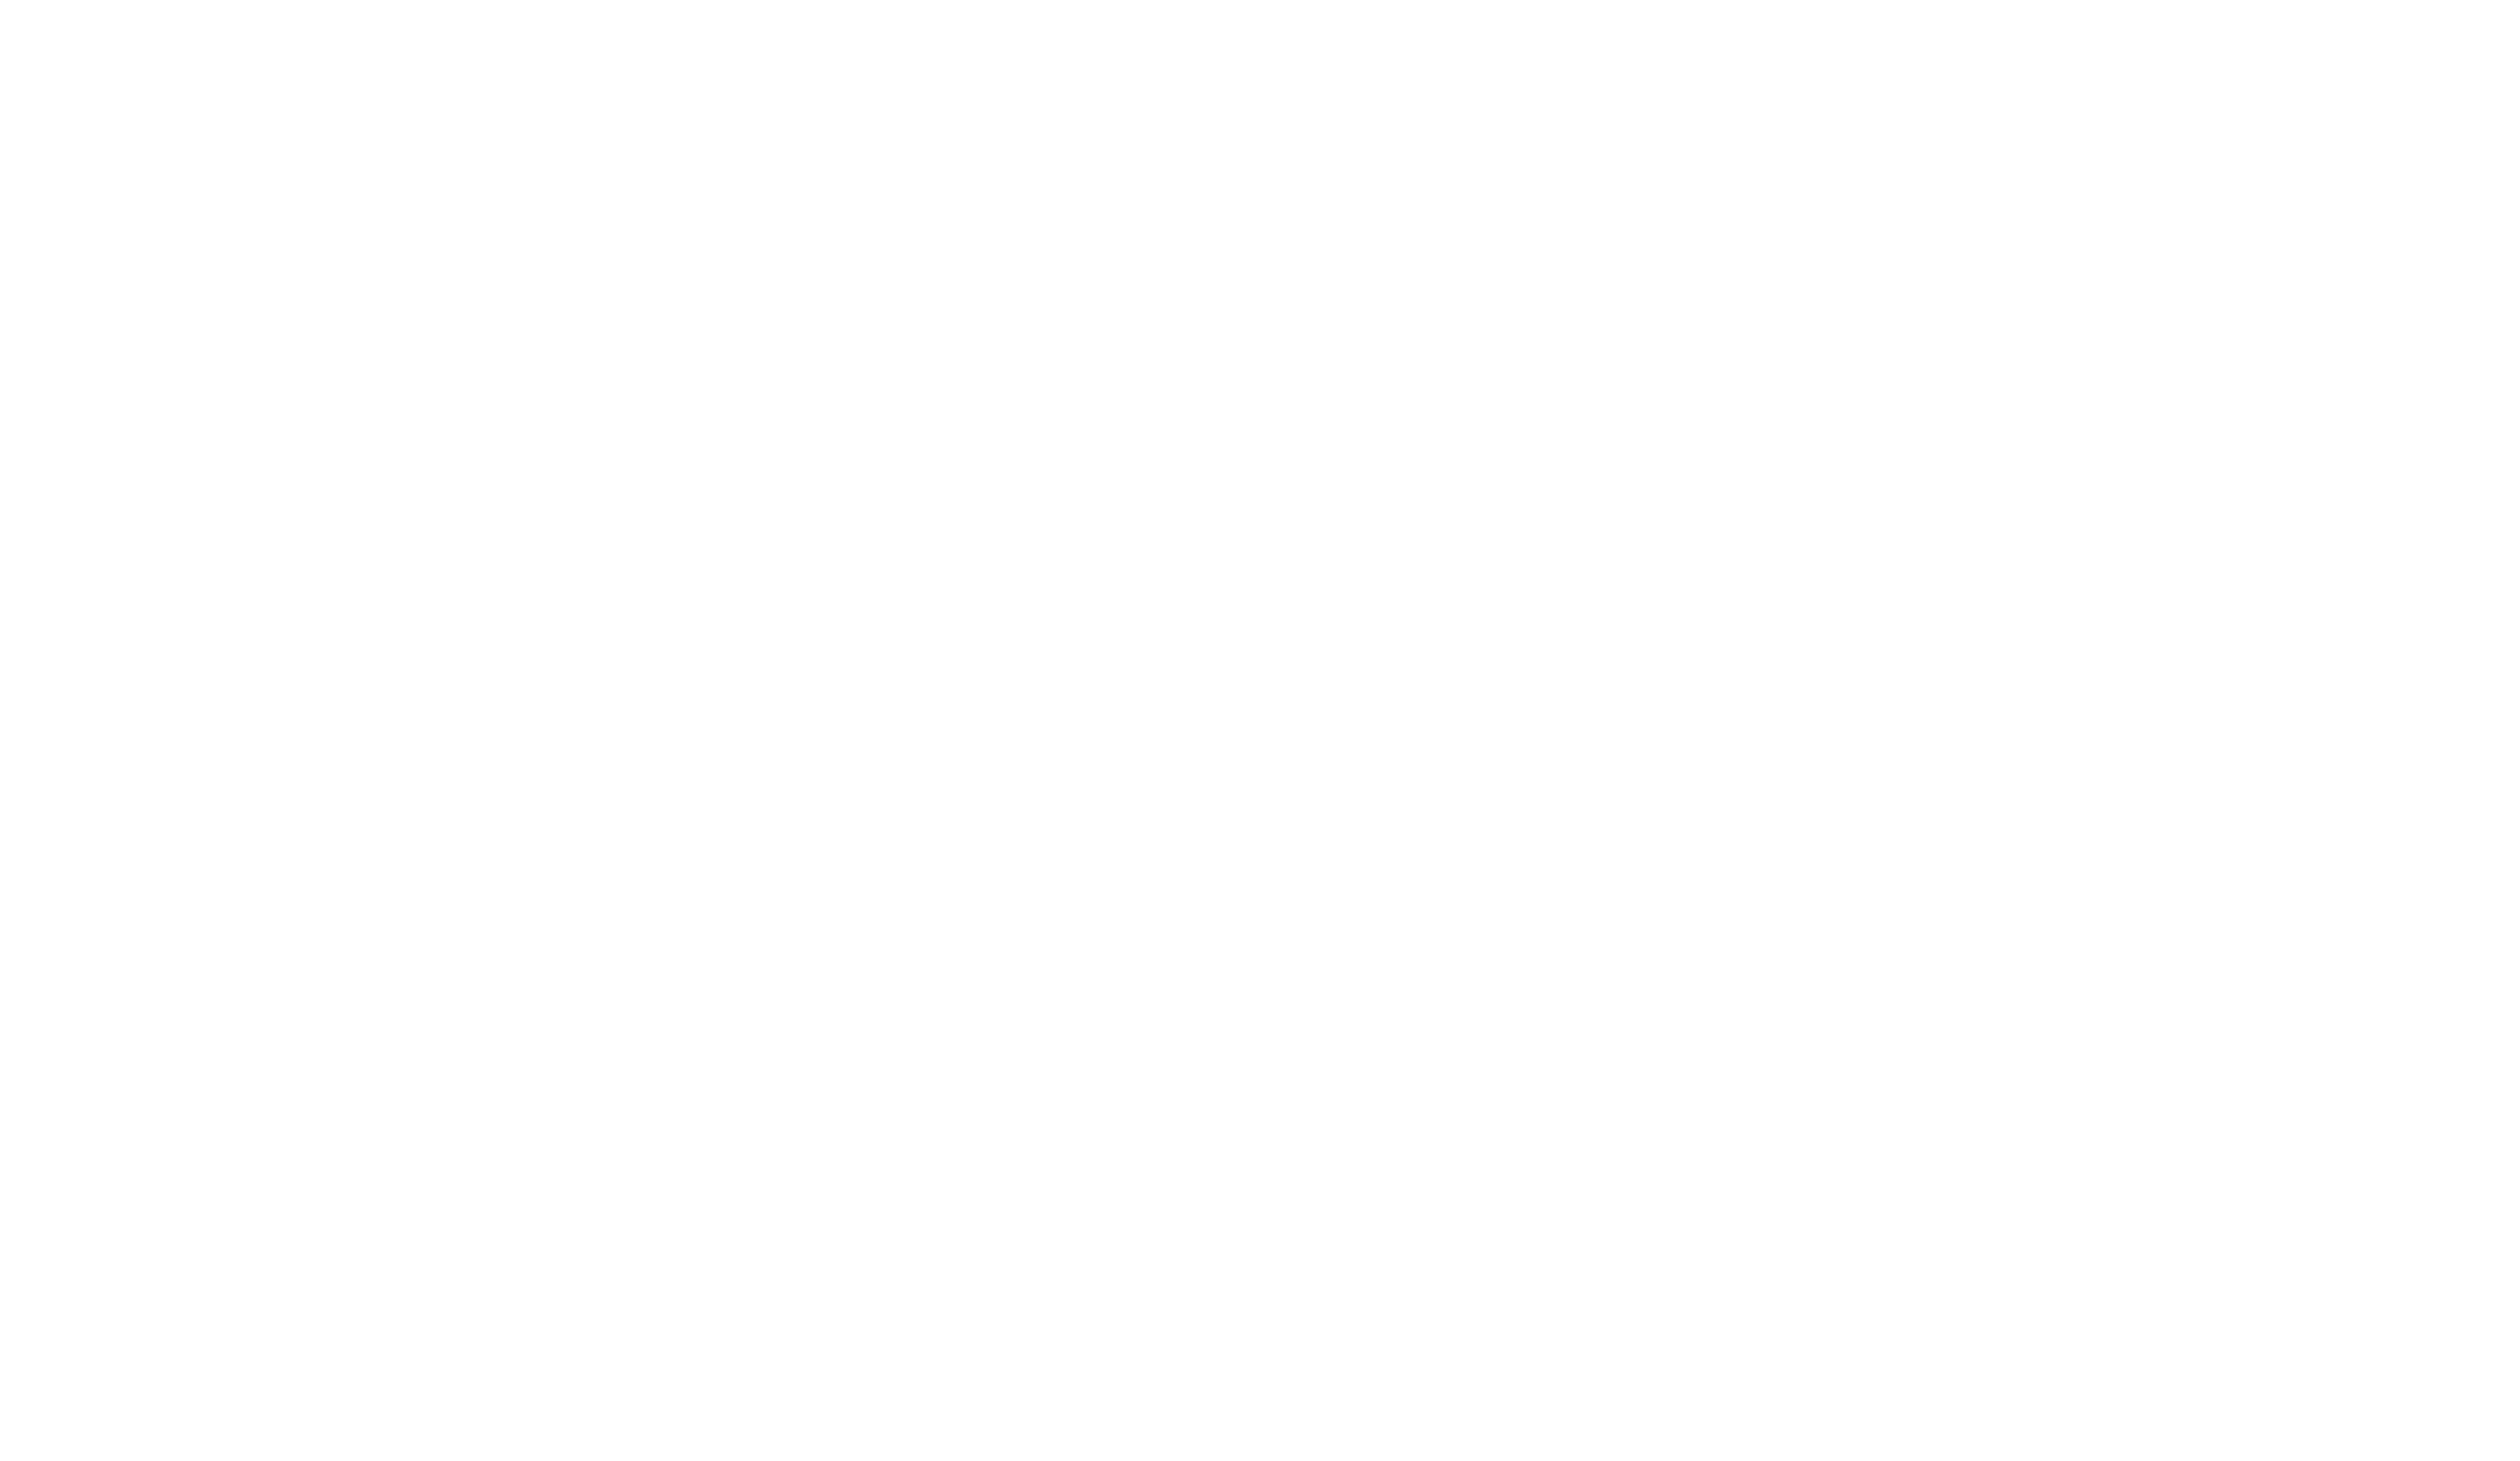 Cream deluxe - song and lyrics by 2V